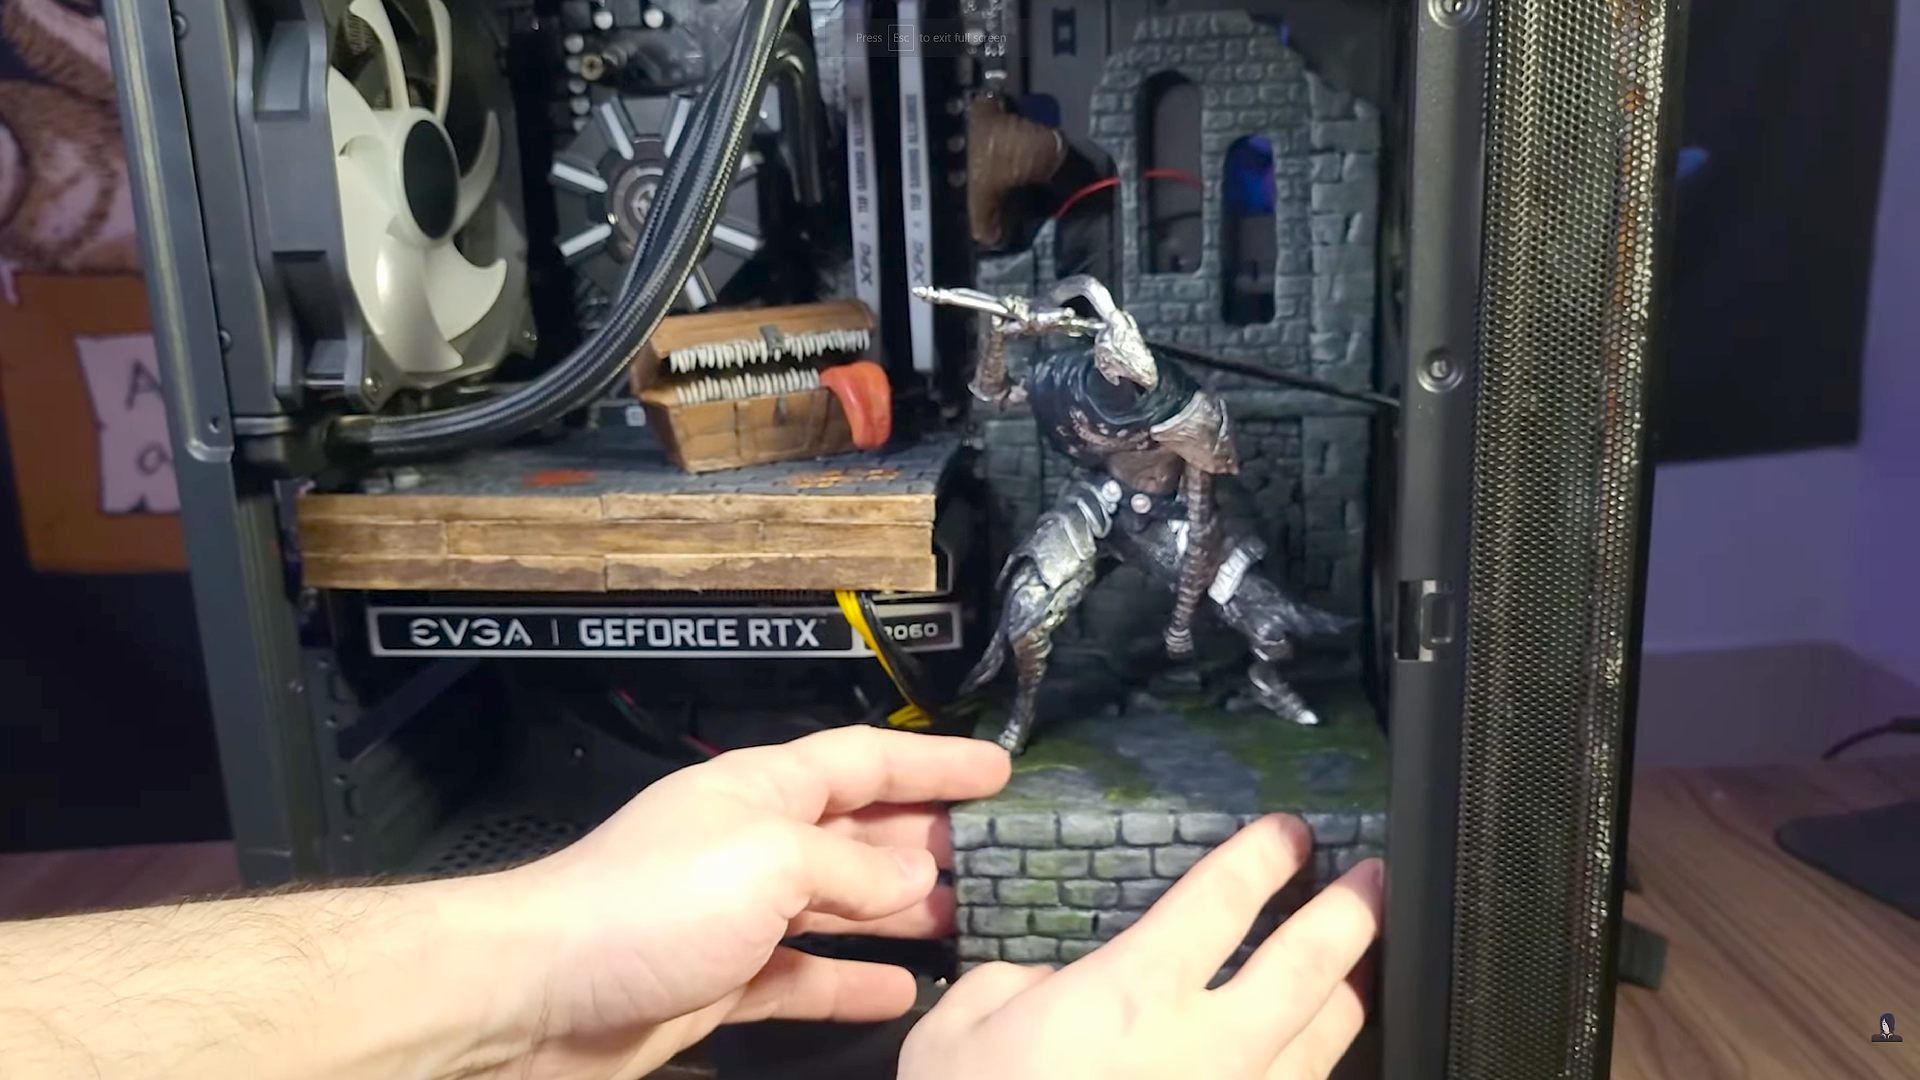 This Dark Souls gaming PC is grossly incandescent